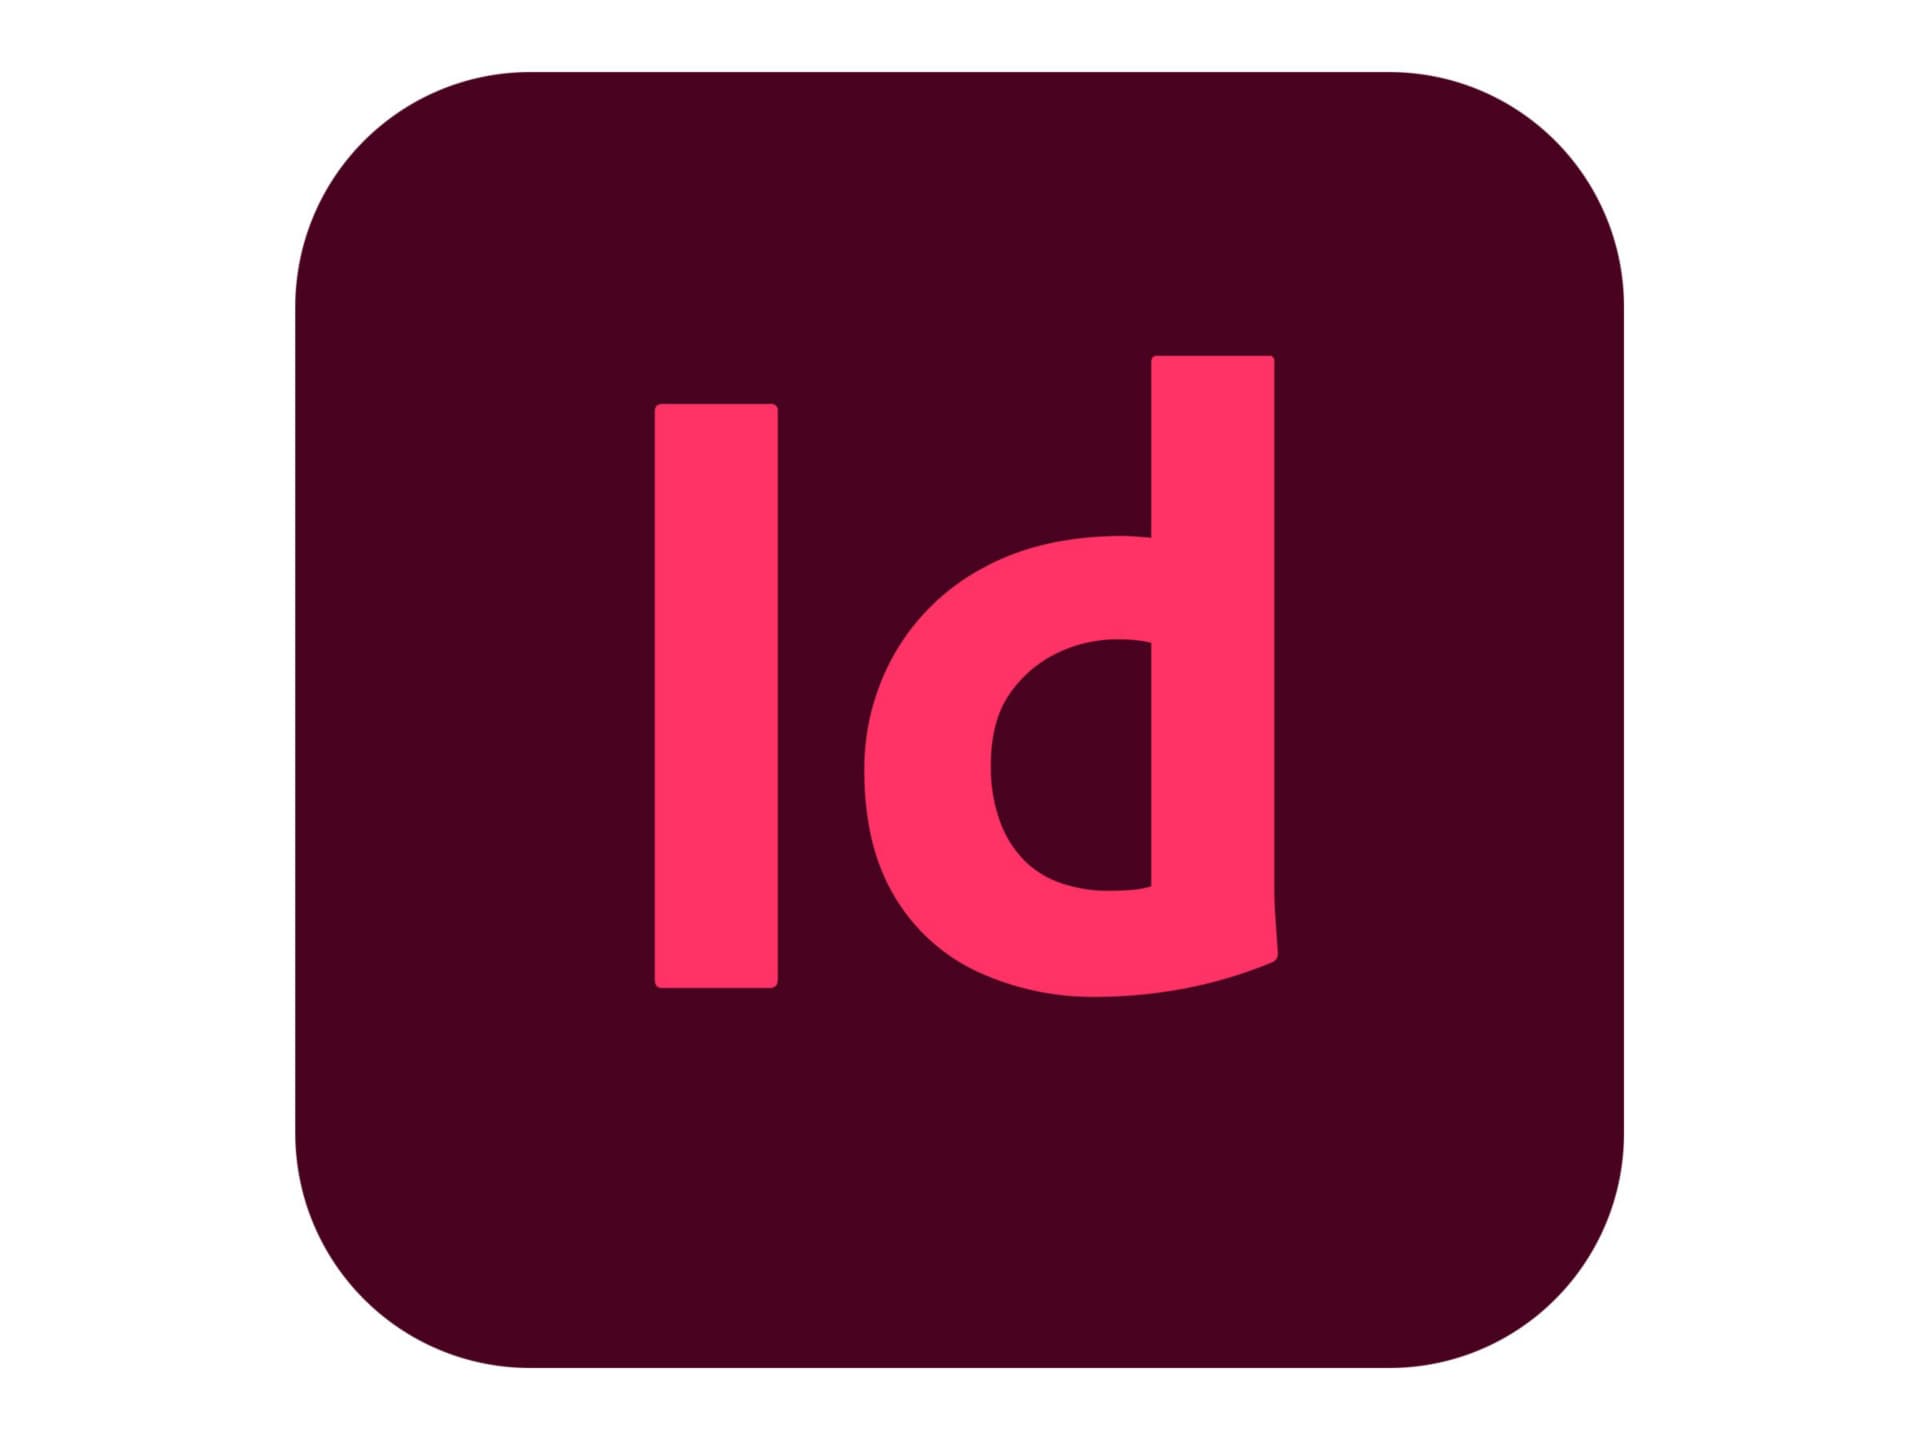 Adobe InDesign CC for teams - Subscription New (2 months) - 1 named user